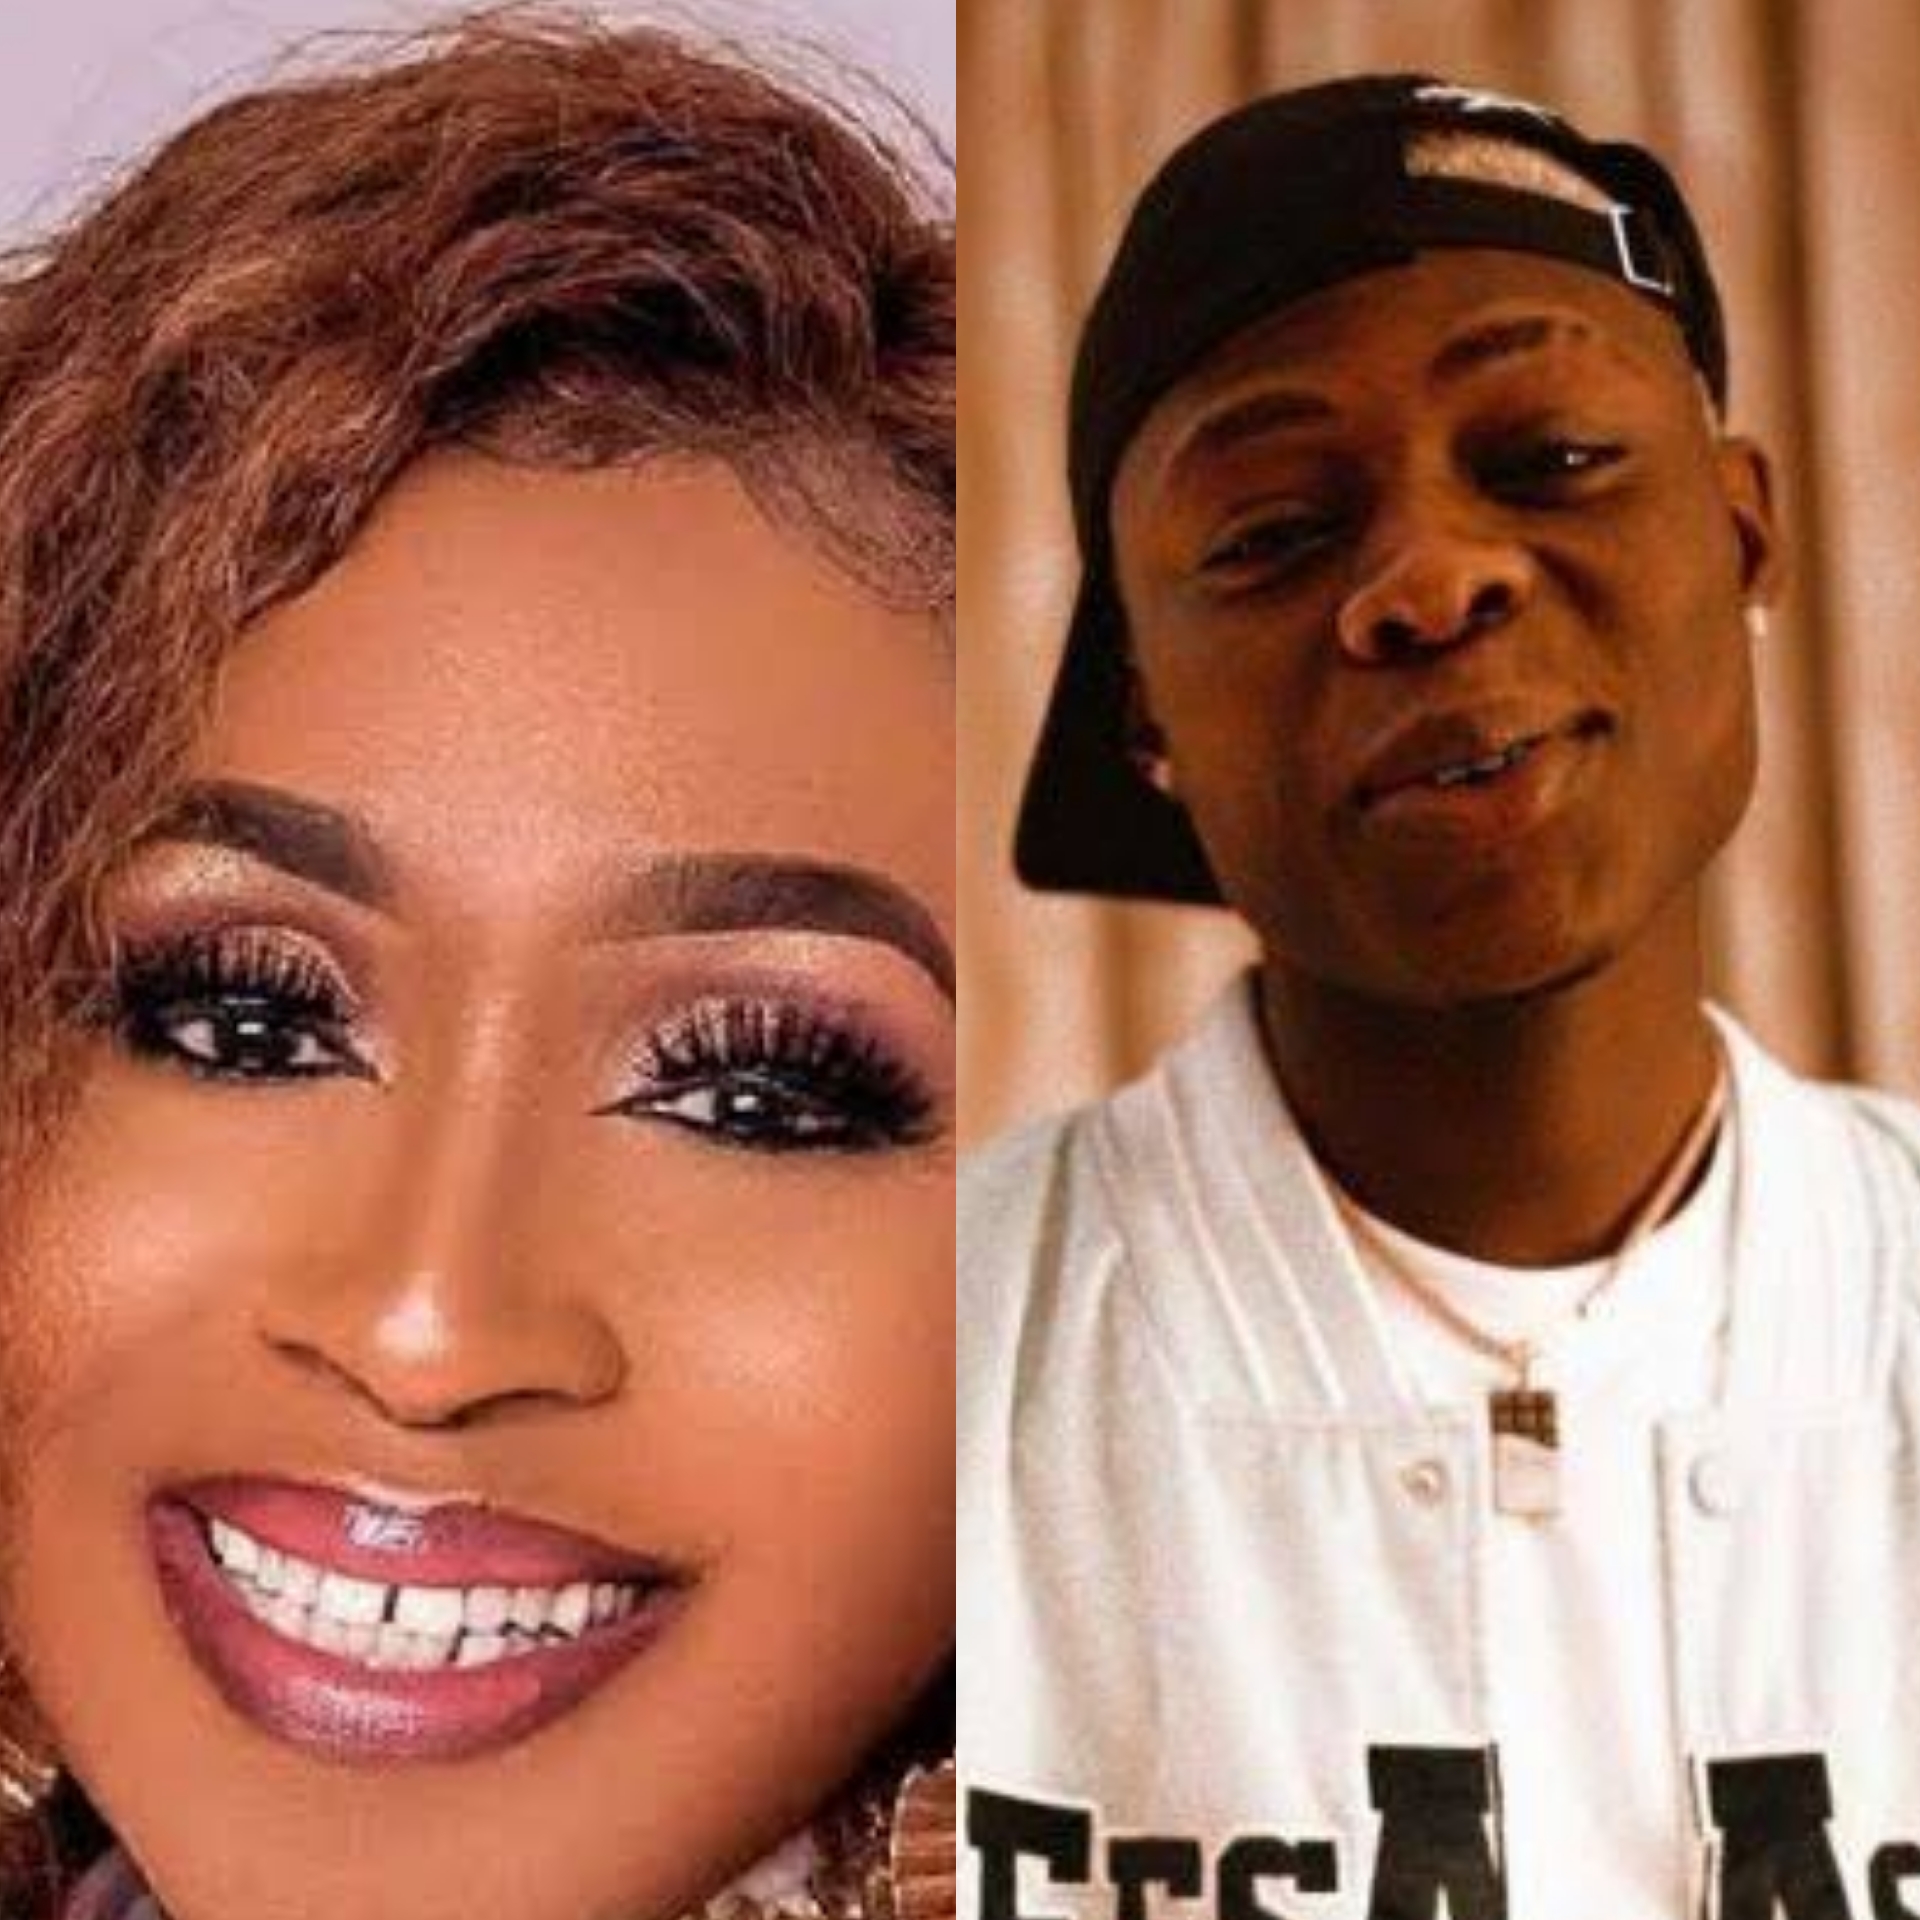 Kemi Olunloyo Raises Controversial Claims About Mohbad’s Demise Involving Drugs, Cultism, and Zlatan Ibile